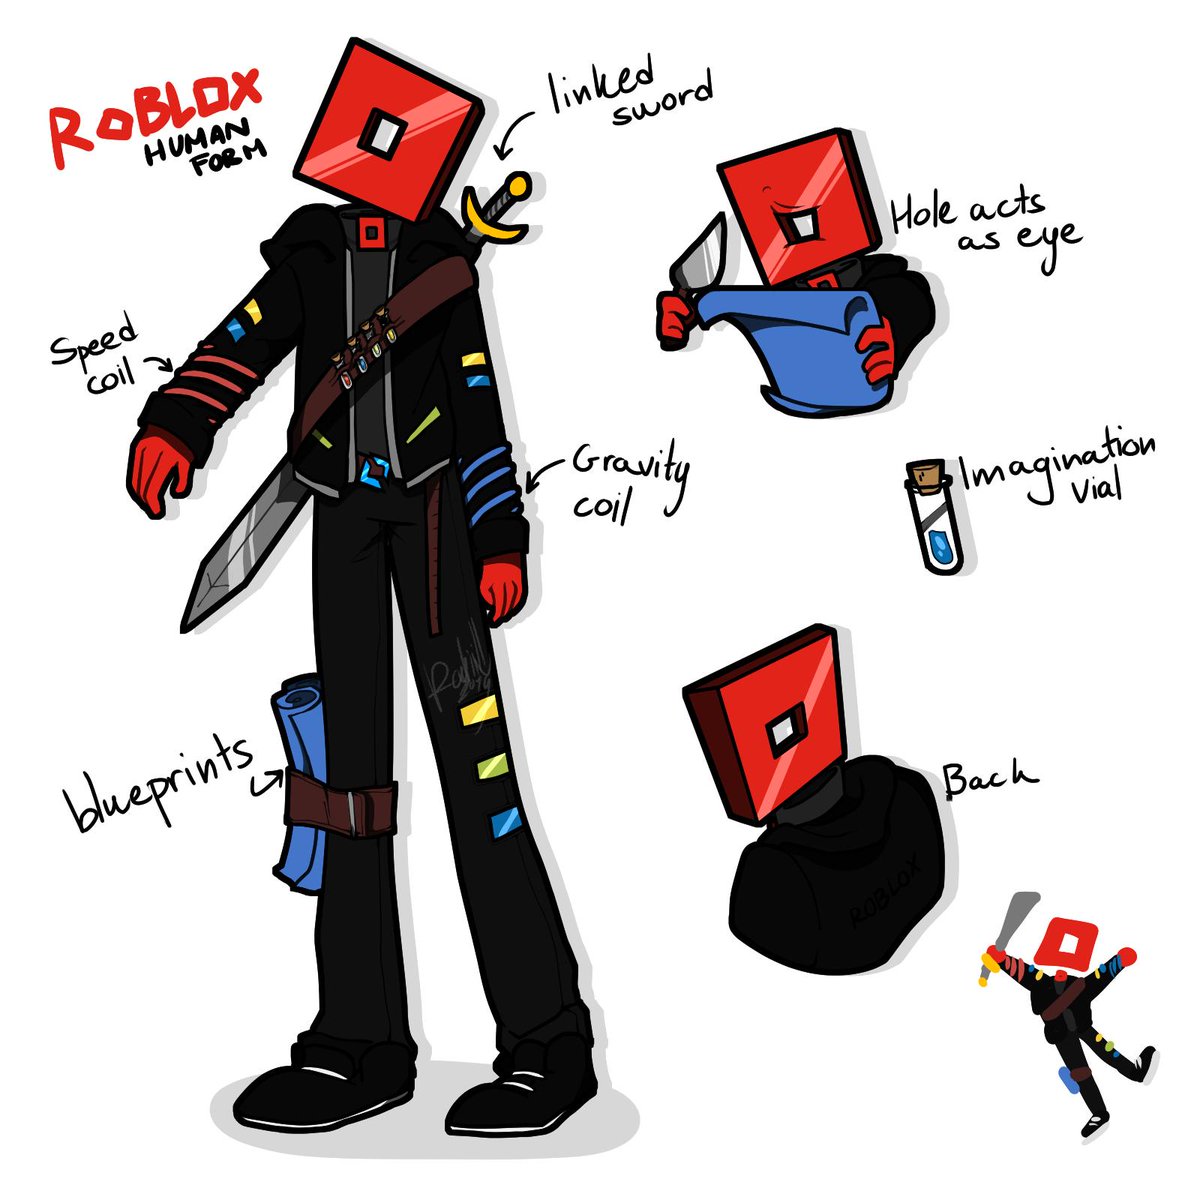 Roblox On Twitter Design An Rthro Avatar Submit Your Concept See Your Art Come To Life The Robloxrthrocontest Is Back Design Your Original Rthro Character To Be Included In - roblox on twitter can you create the very best dance crew